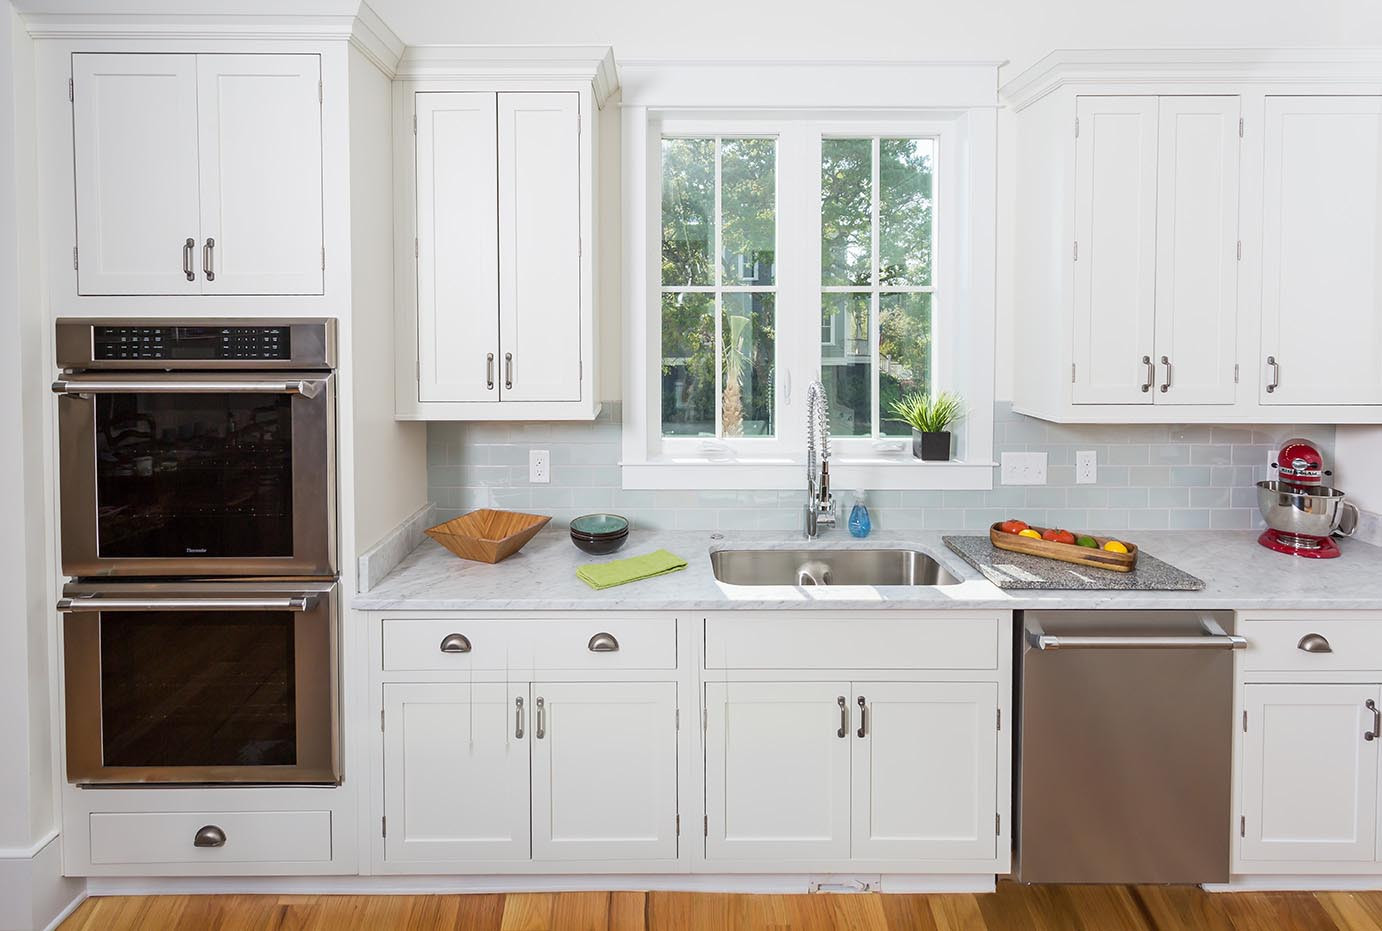 Inset Kitchen Cabinet
 Luxury South Carolina Home features Inset Shaker Cabinets